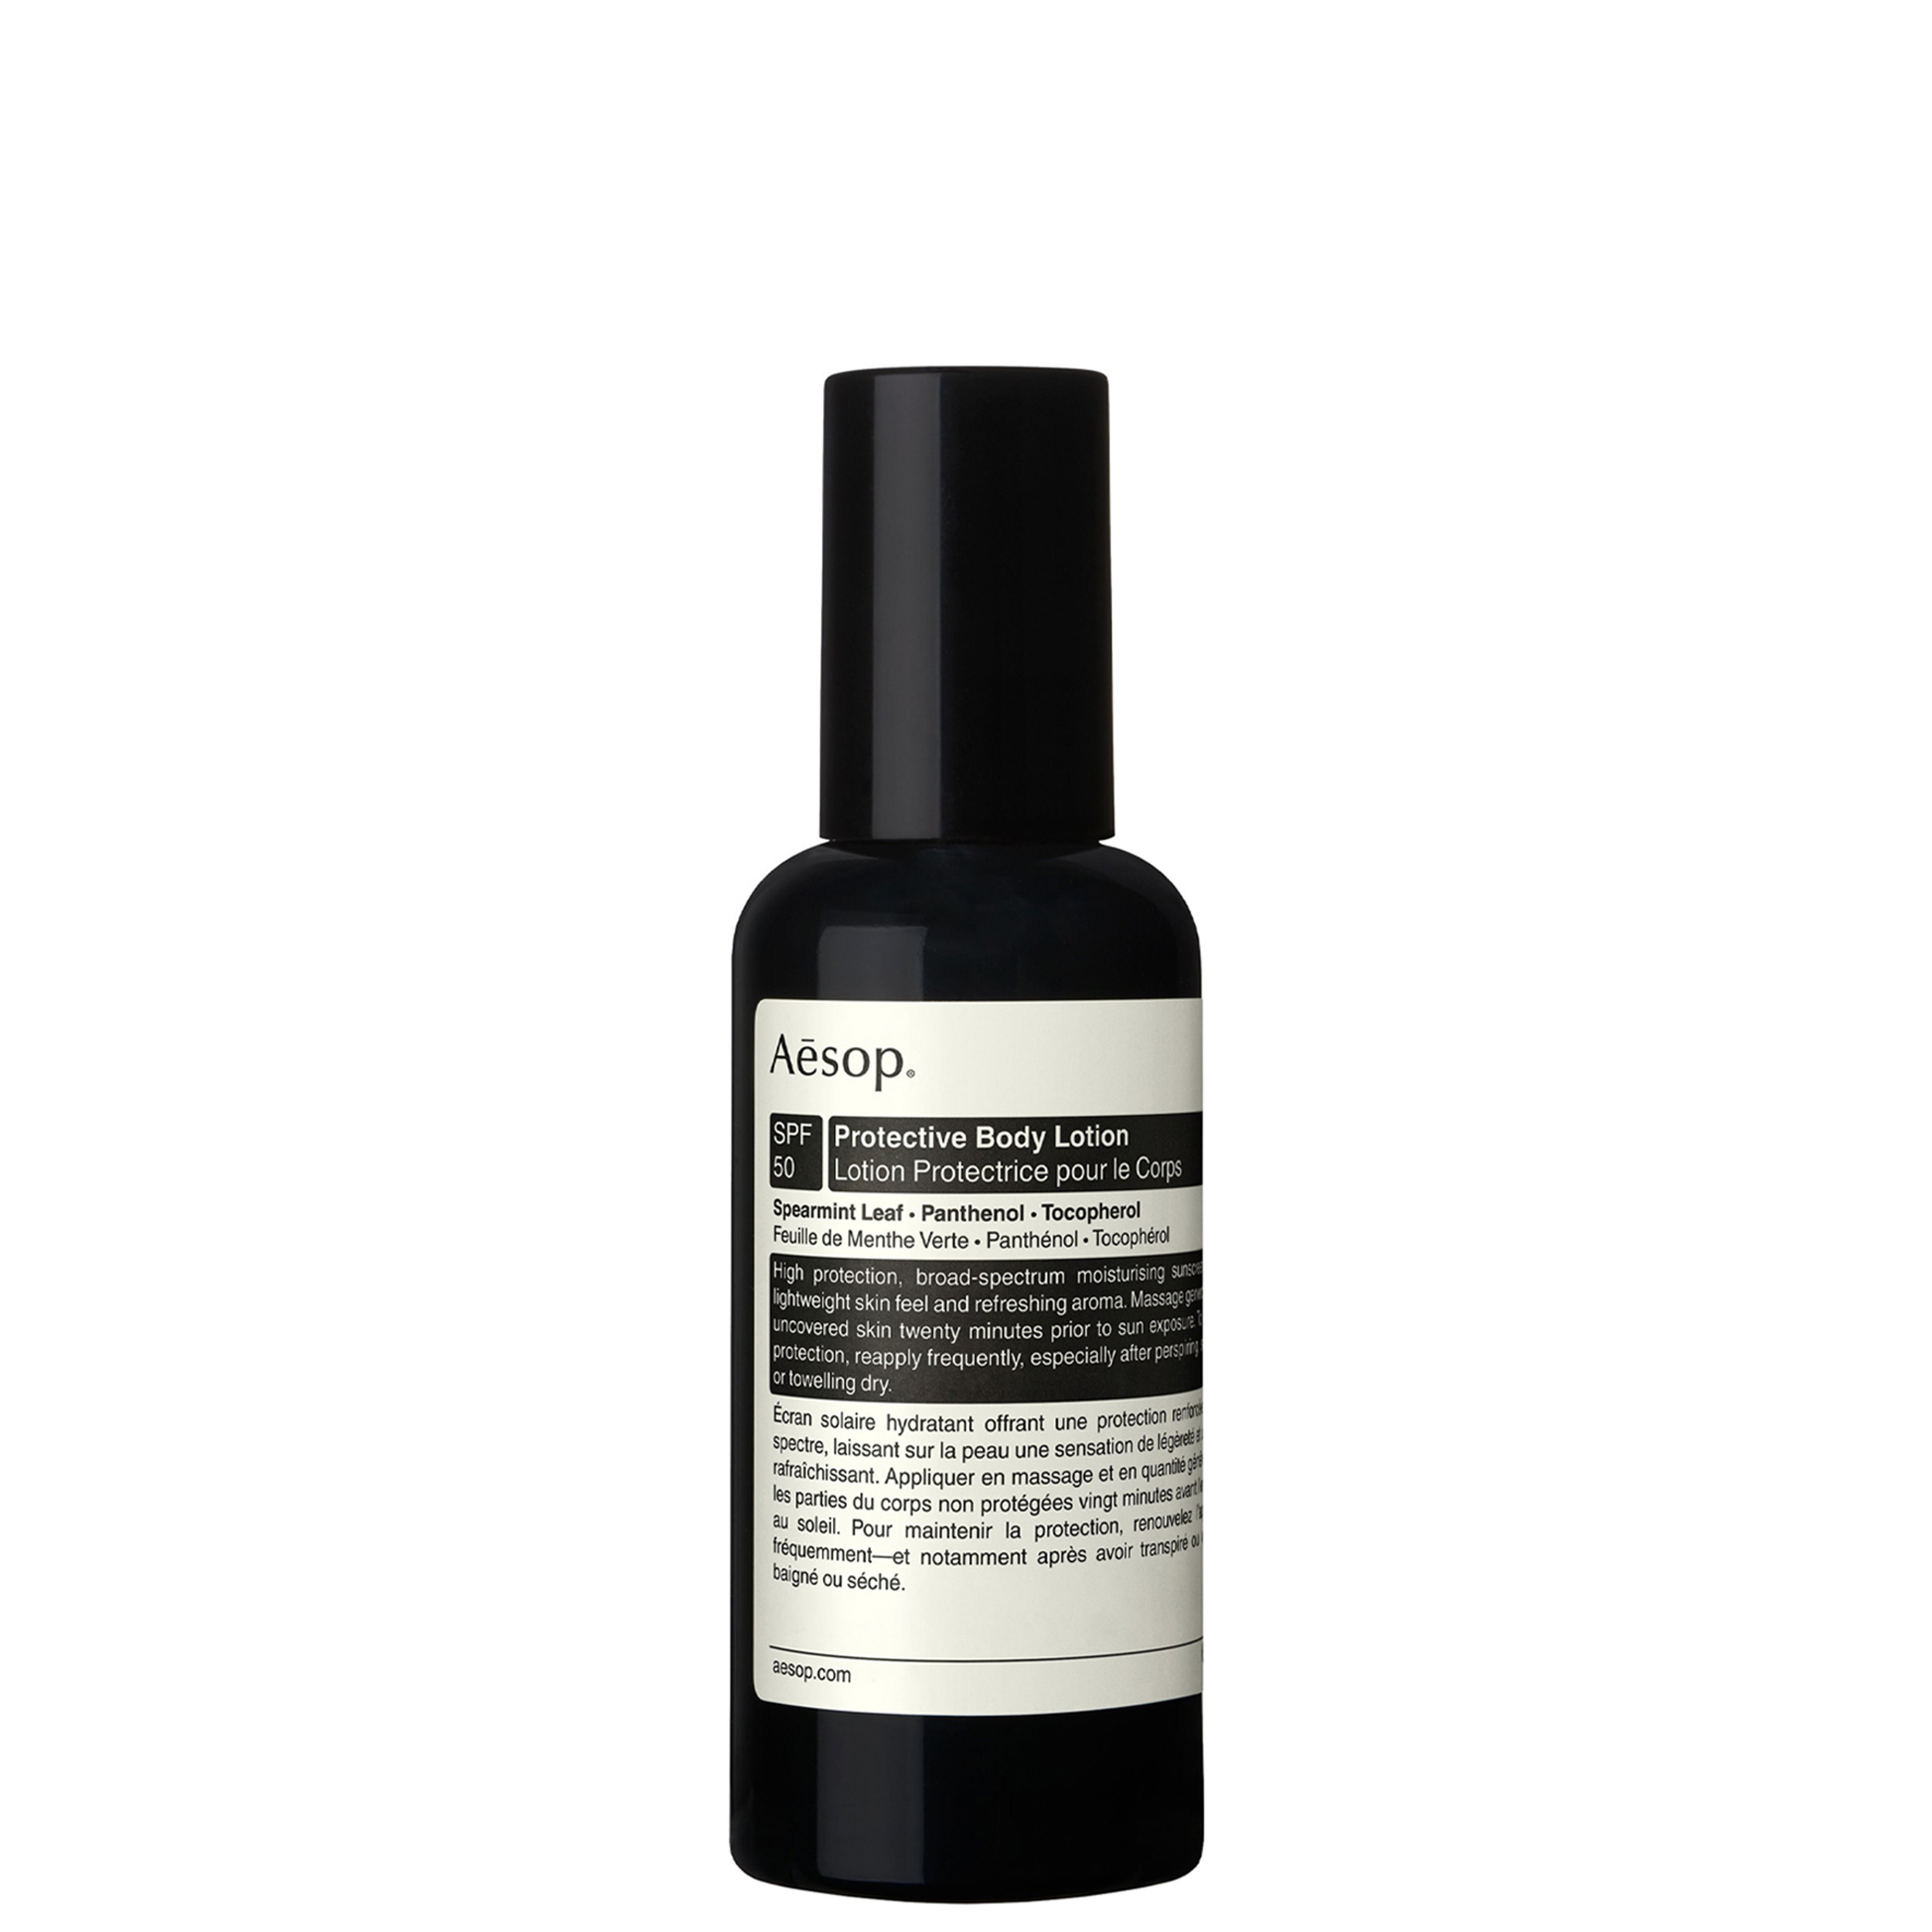 Aesop Protective Body Lotion SPF50 150mL